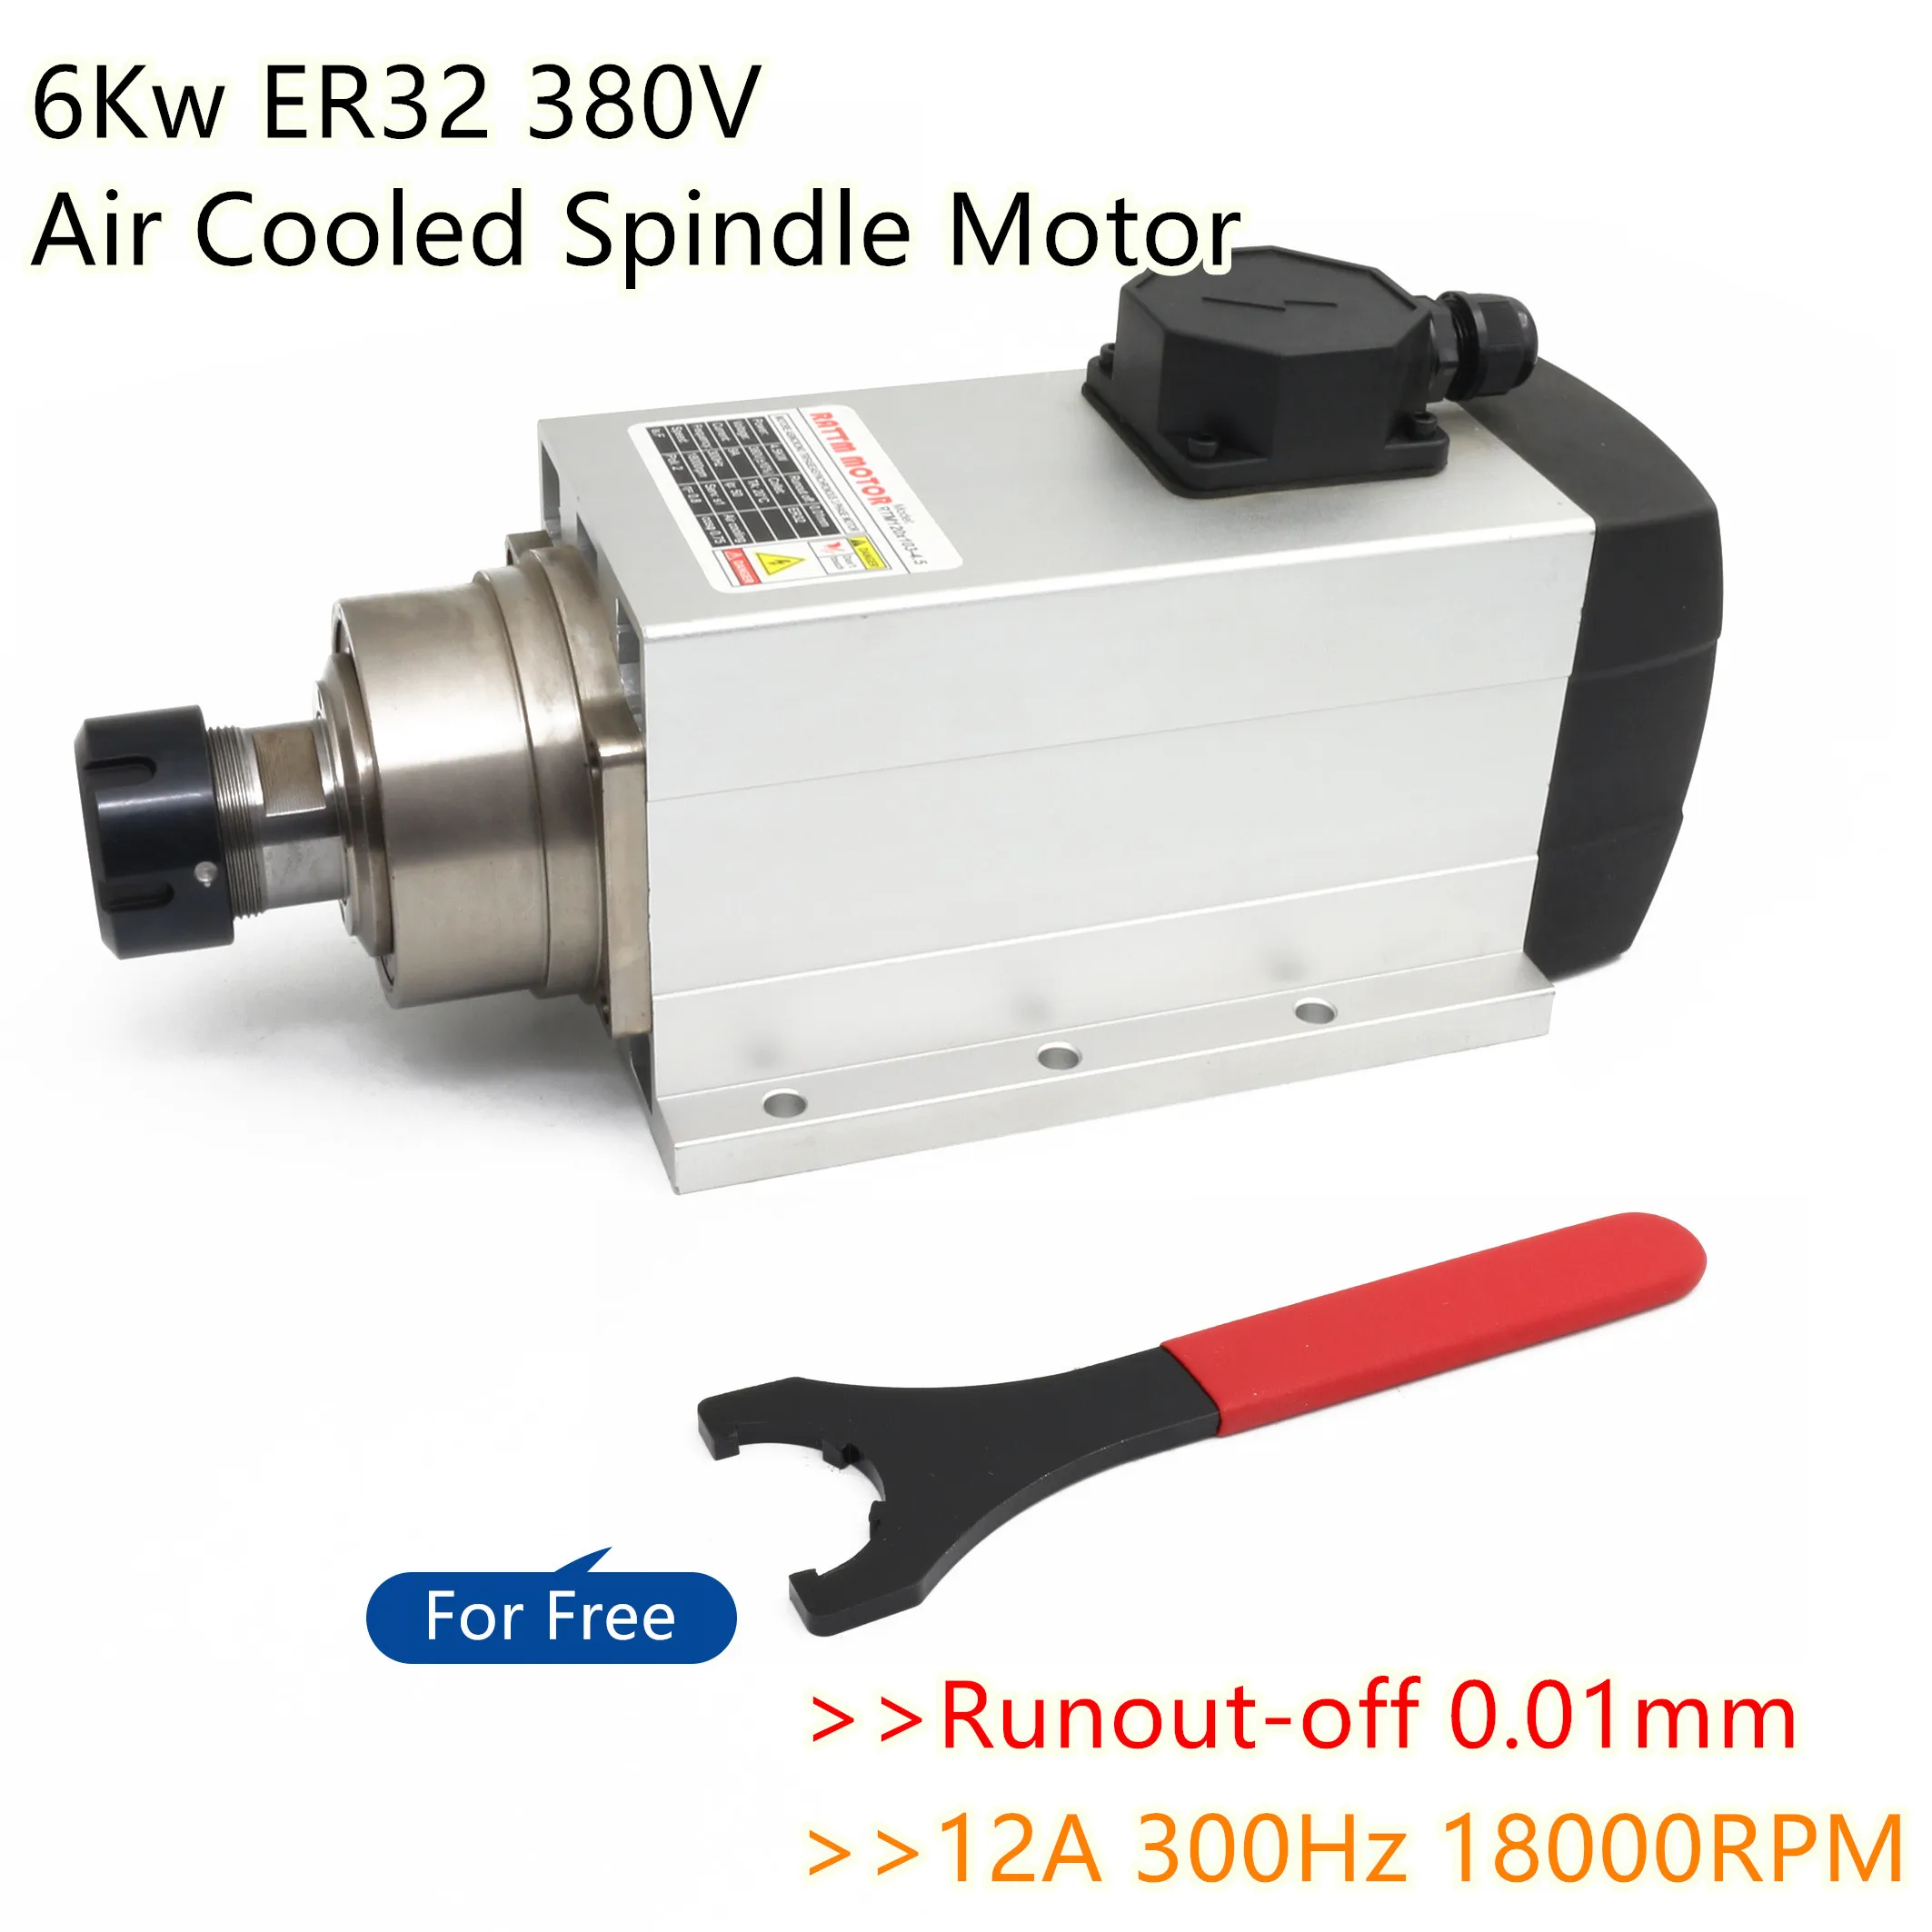 

6Kw ER32 Square Air Cooled Spindle Motor Runout-off 0.01mm 12A 300Hz 18000RPM 380V for CNC Milling Engraving Router Machine